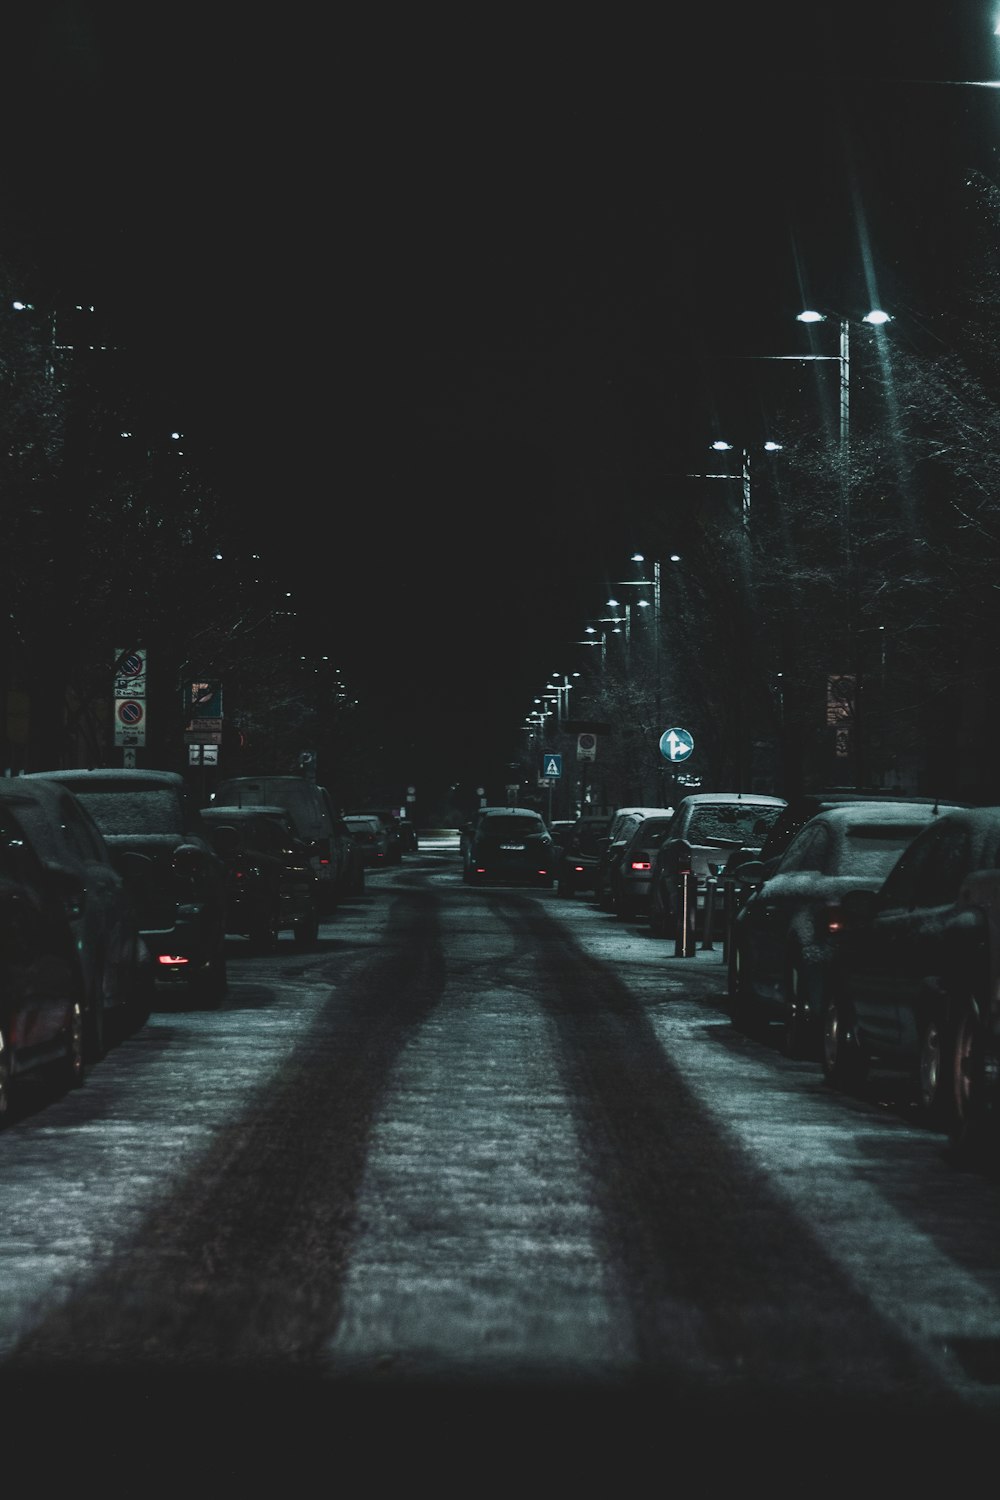 cars parked at night